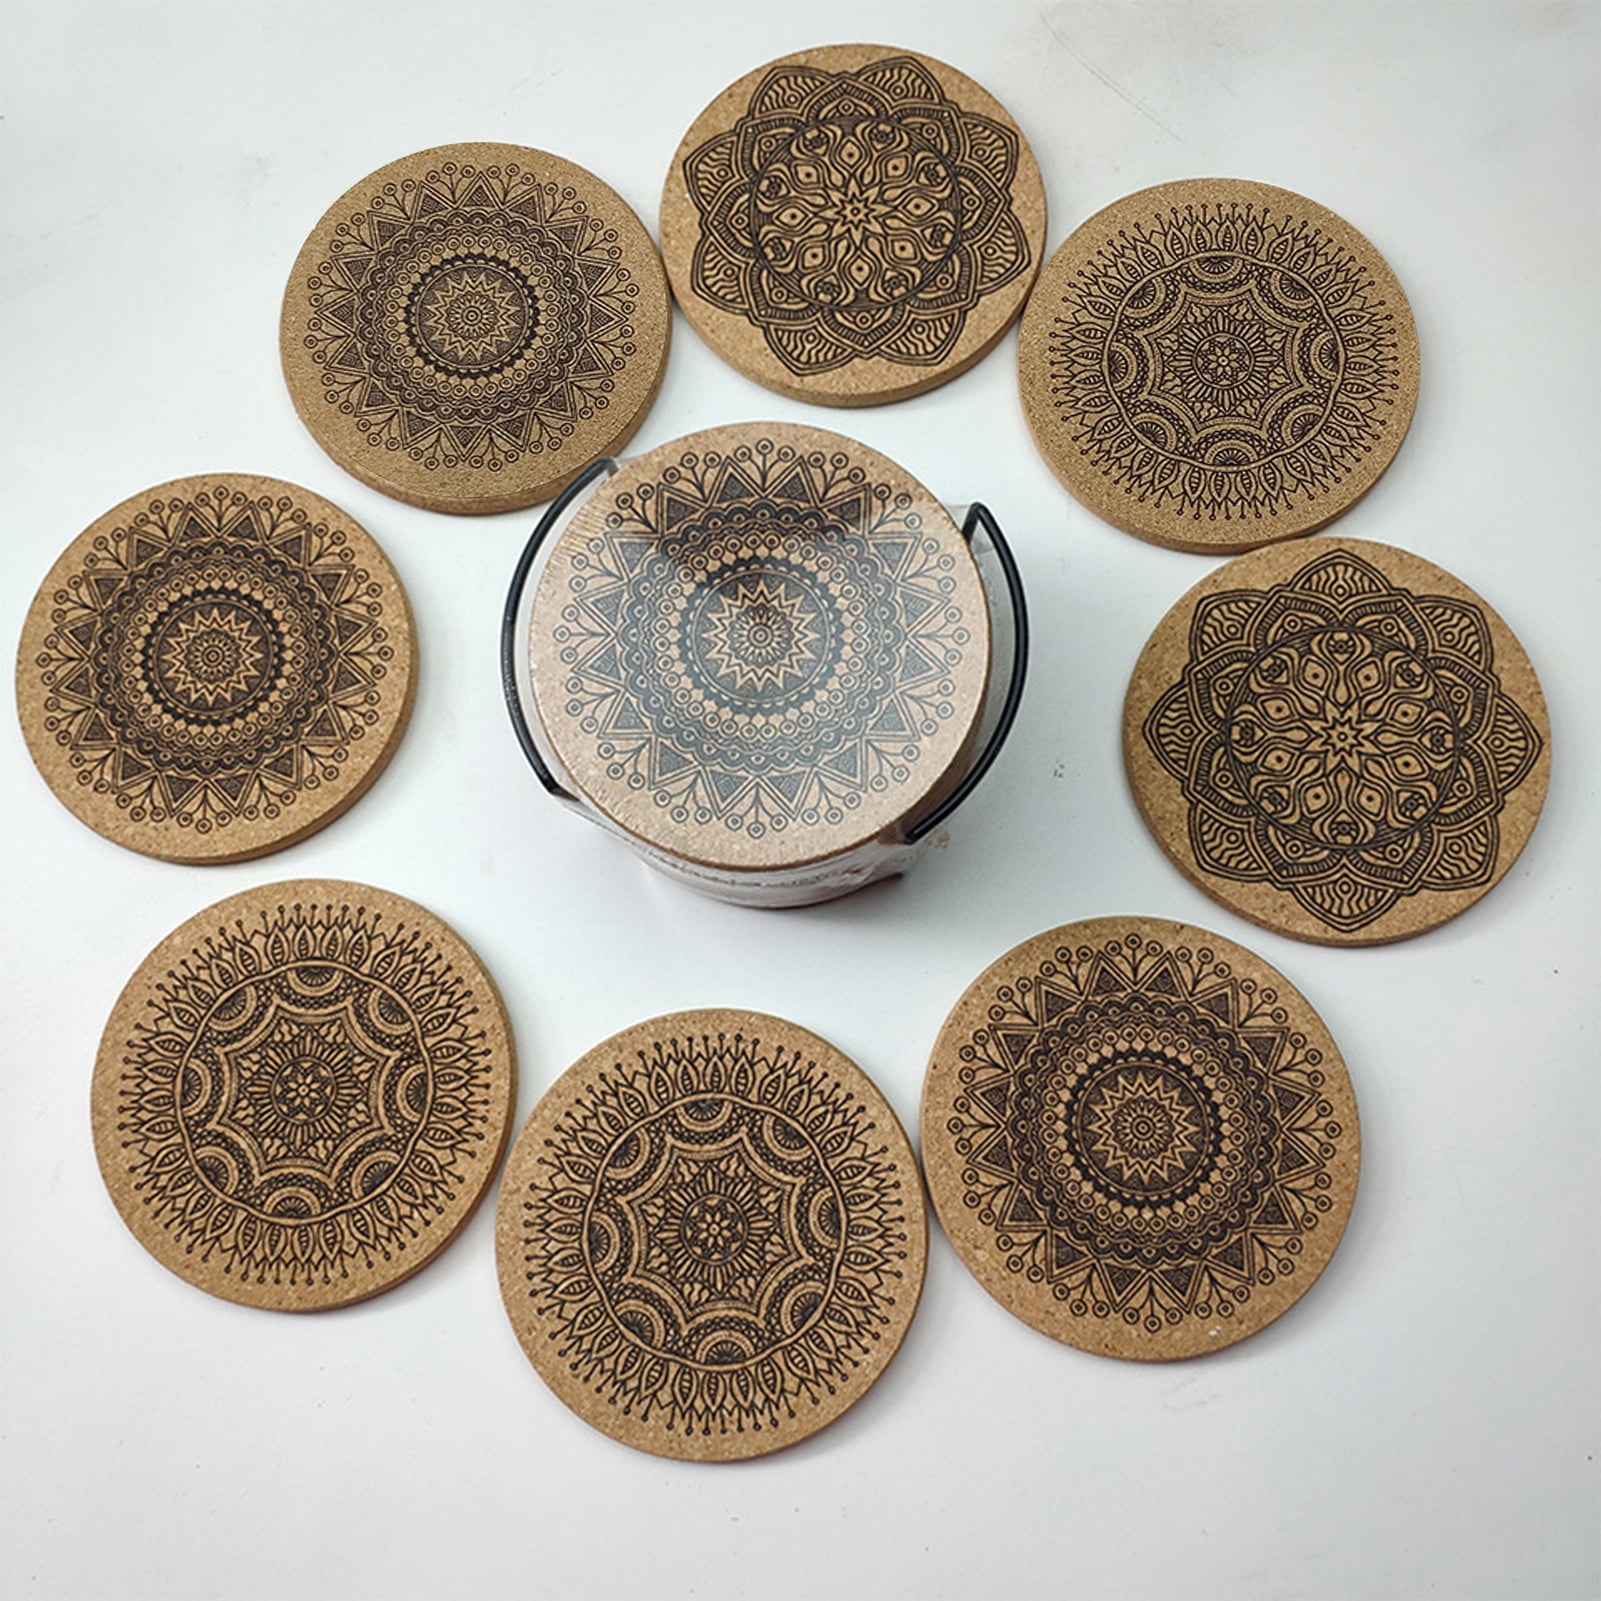 6Pcs/Set Cork Coasters Drinks Absorbent Cute & Funny Large Round Outdoor Cup Coasters for Wooden Table Coffee Trivet, Cups and Mugs - Cool Drink Coaster Gift - Walmart.com